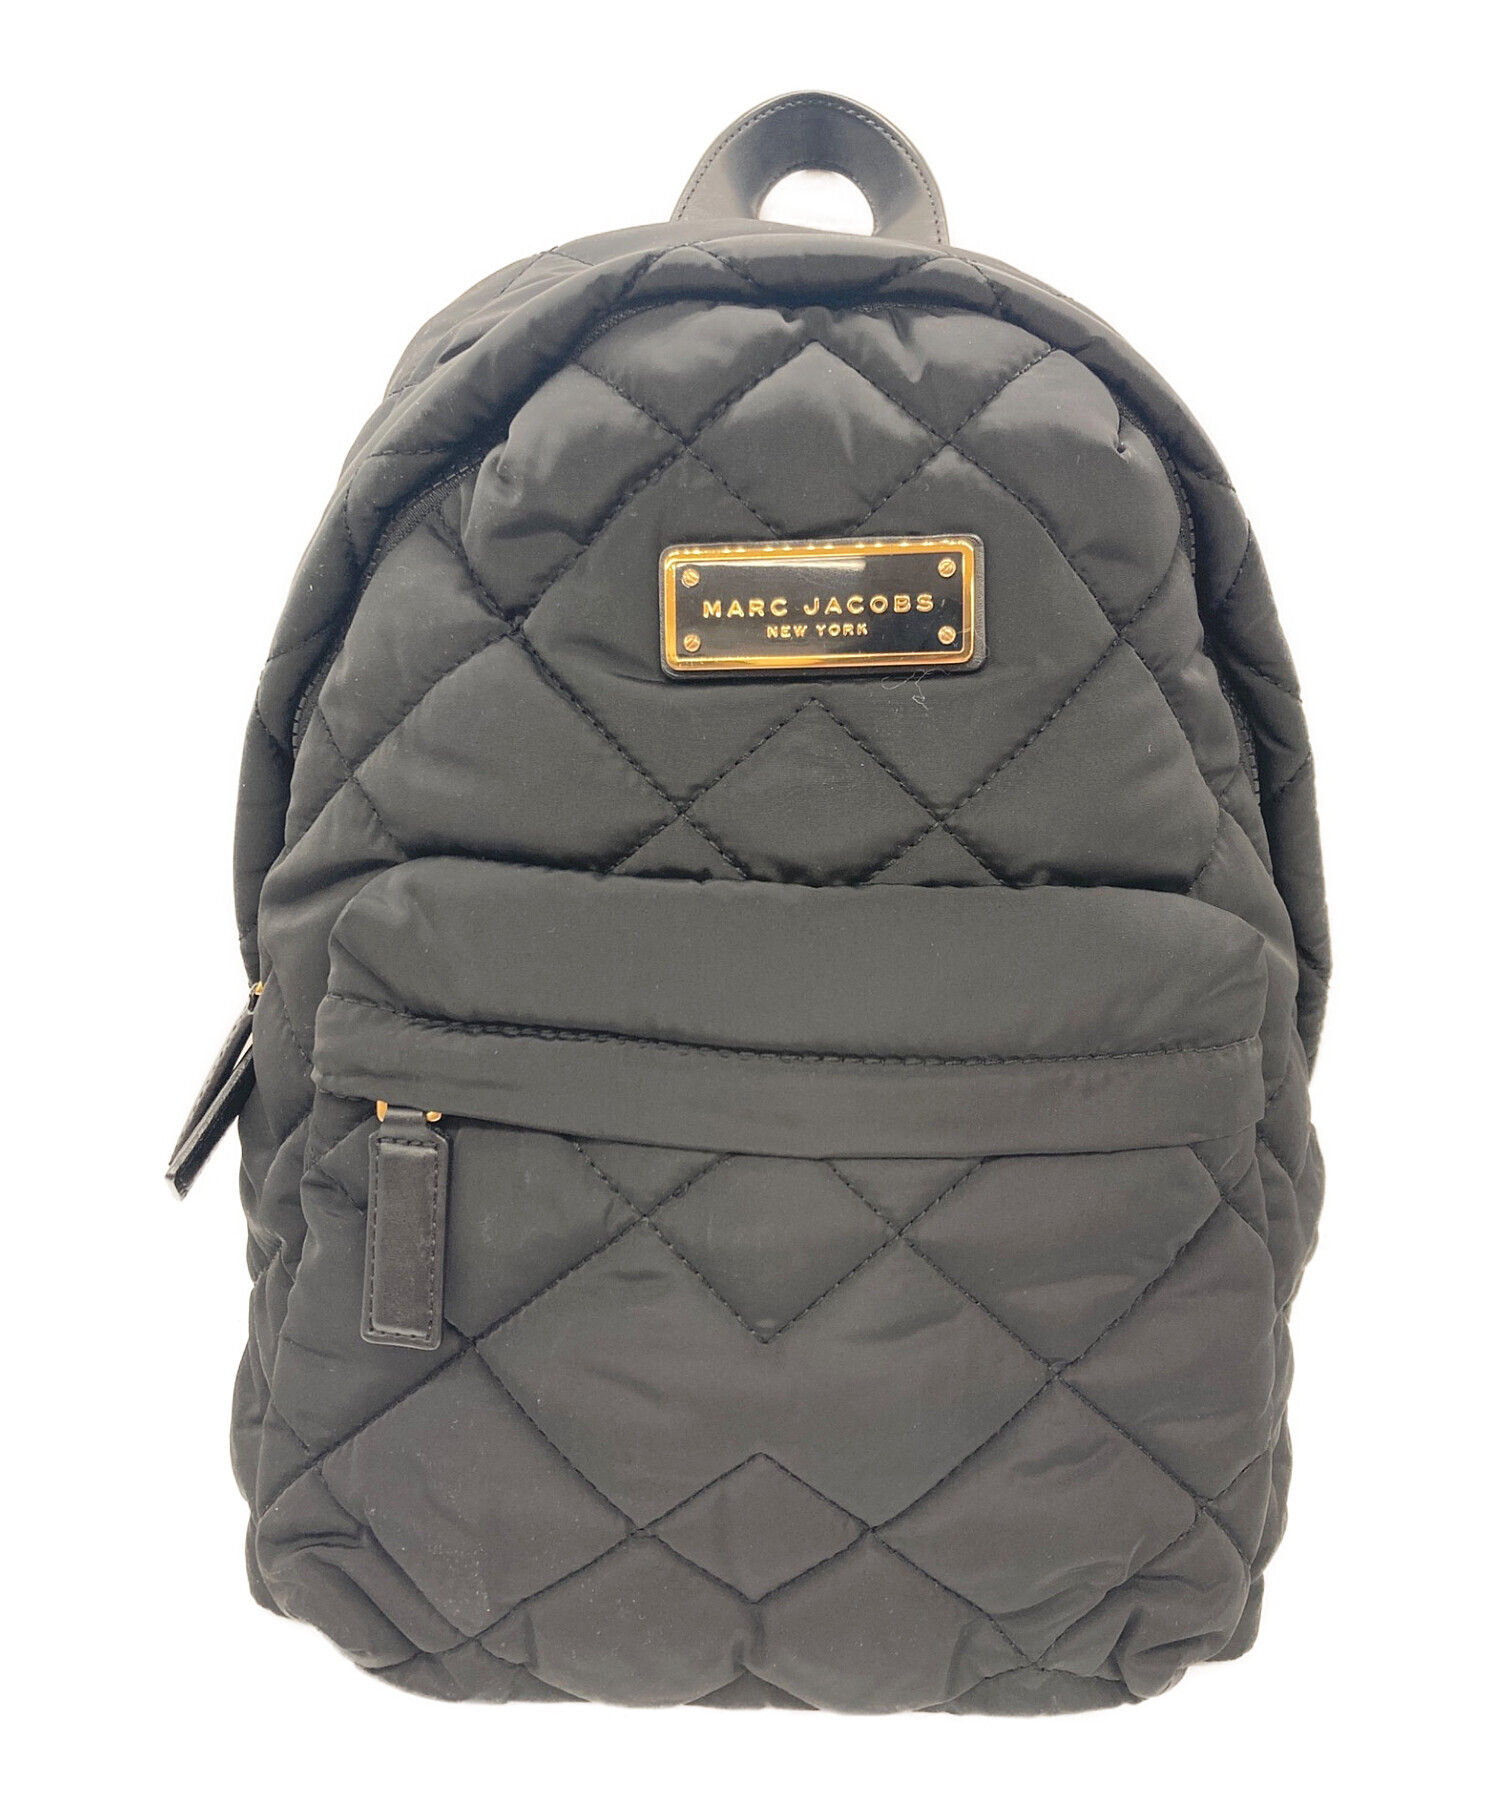 MARC JACOBS (マーク ジェイコブス) QUILTED NYLON BACKPACK ブラック